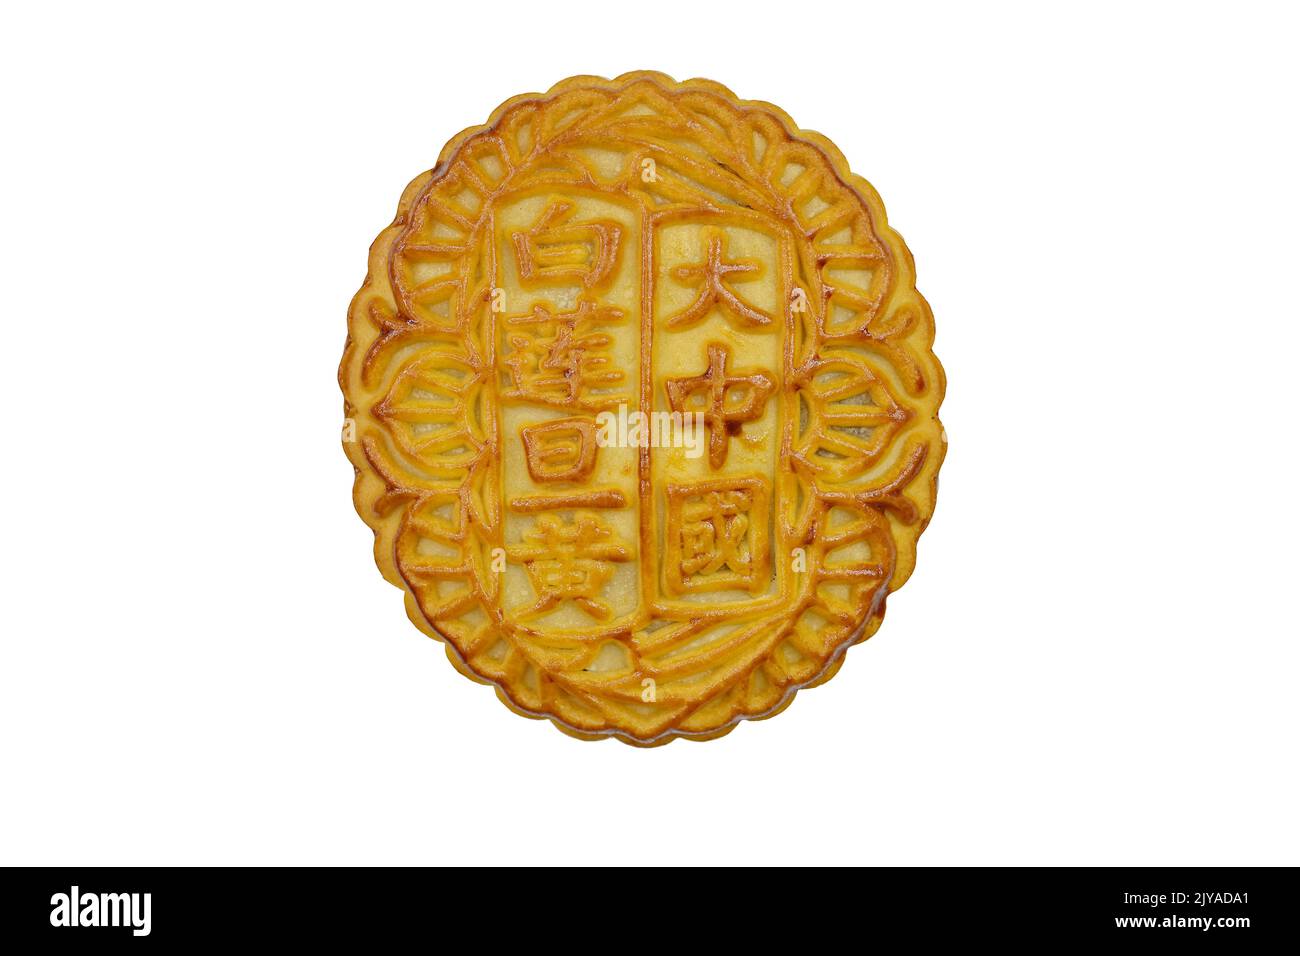 A traditional Chinese mooncake, a round pastry with lotus seed paste, about 4inch in diameter and 1.5inch in height, isolated on white background Stock Photo